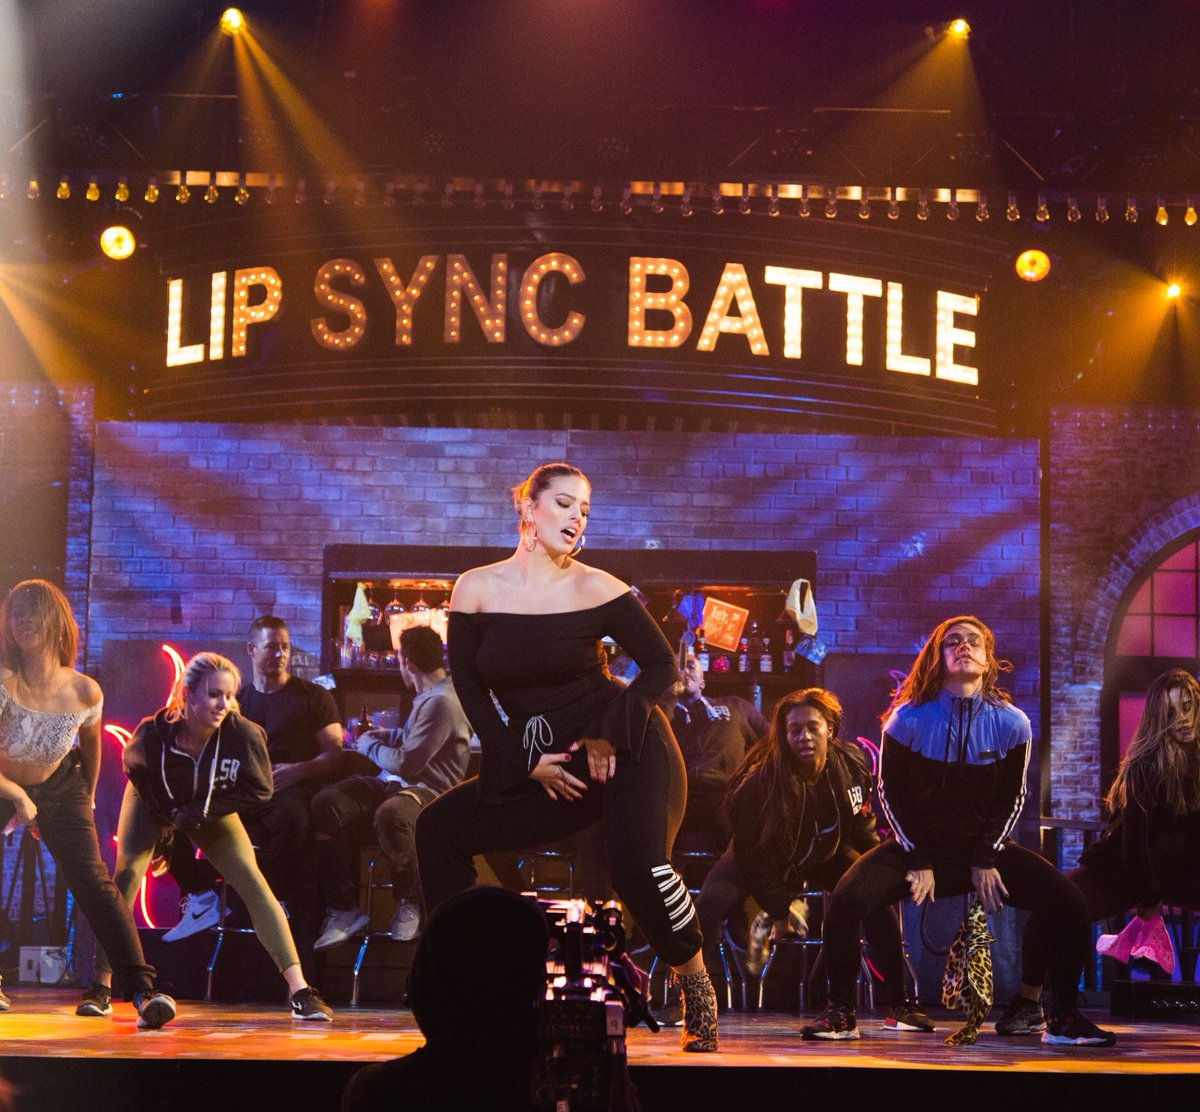 ... and this was just the rehearsals! You don't want to miss #LipSyncBattle on @spike tonight! https://t.co/7FMfLahqa1